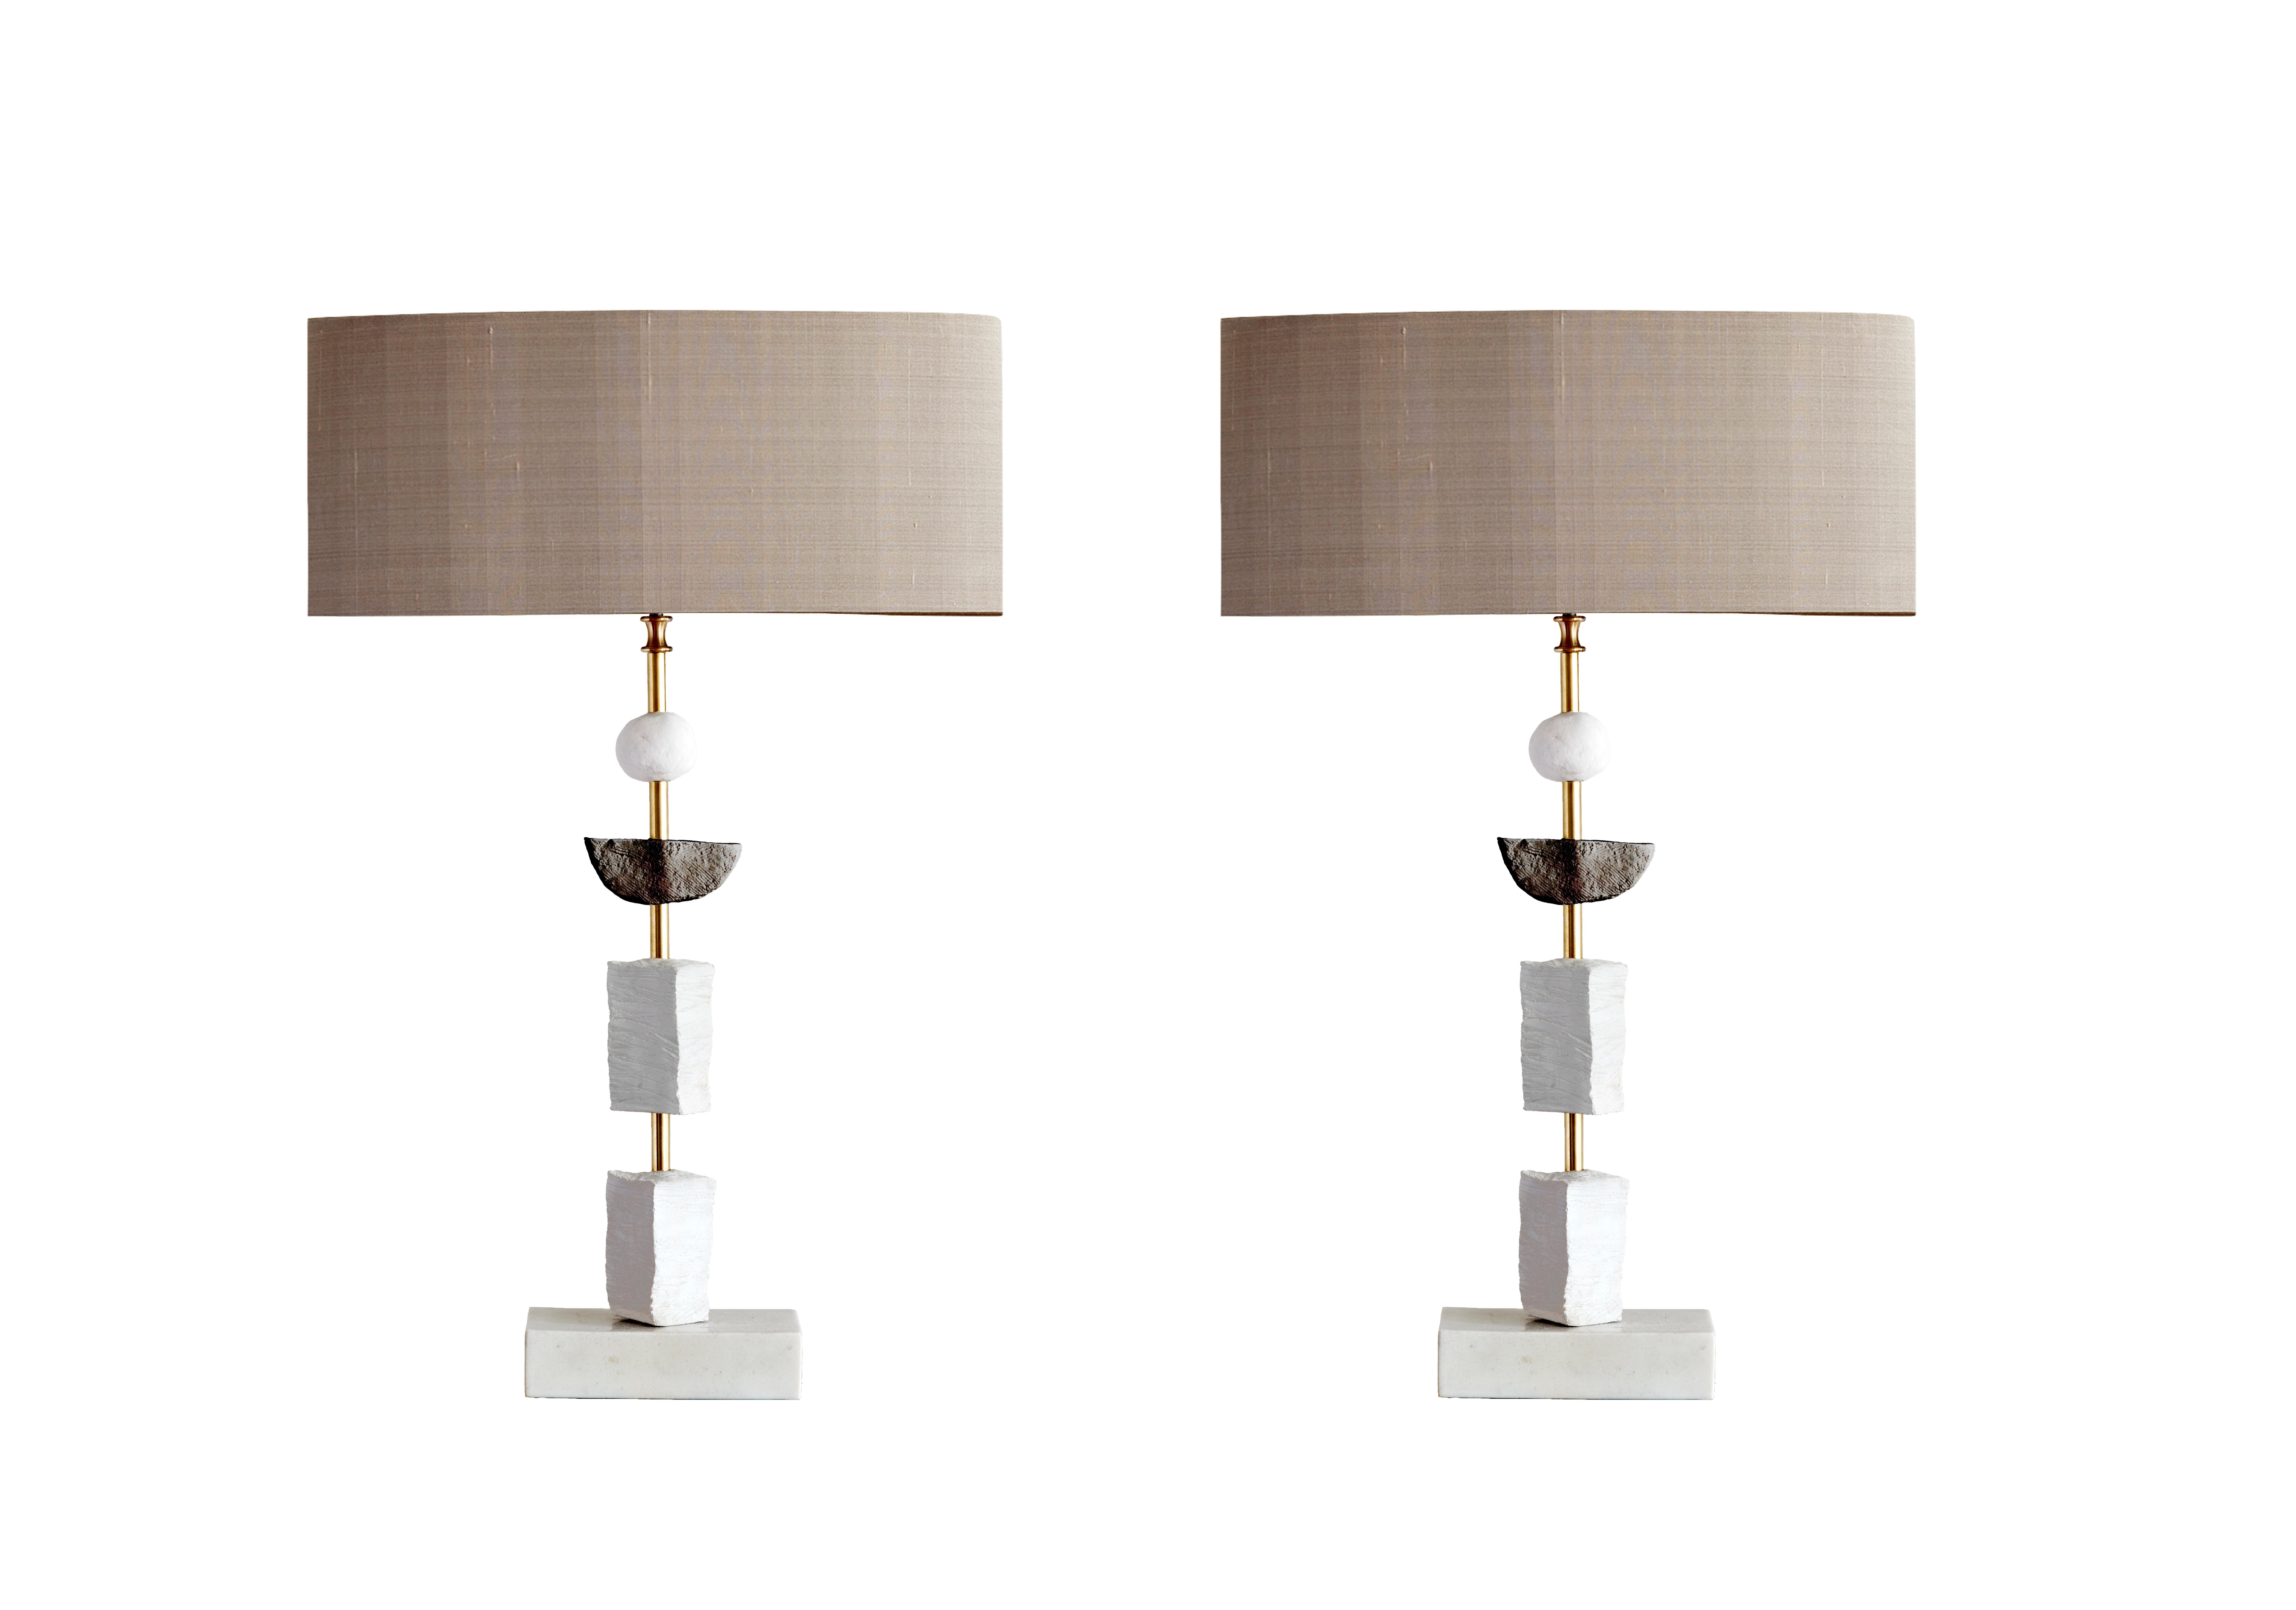 English 'Synergy'  Table Lamps in Dark Patina, European, Contemporary by Margit Wittig For Sale